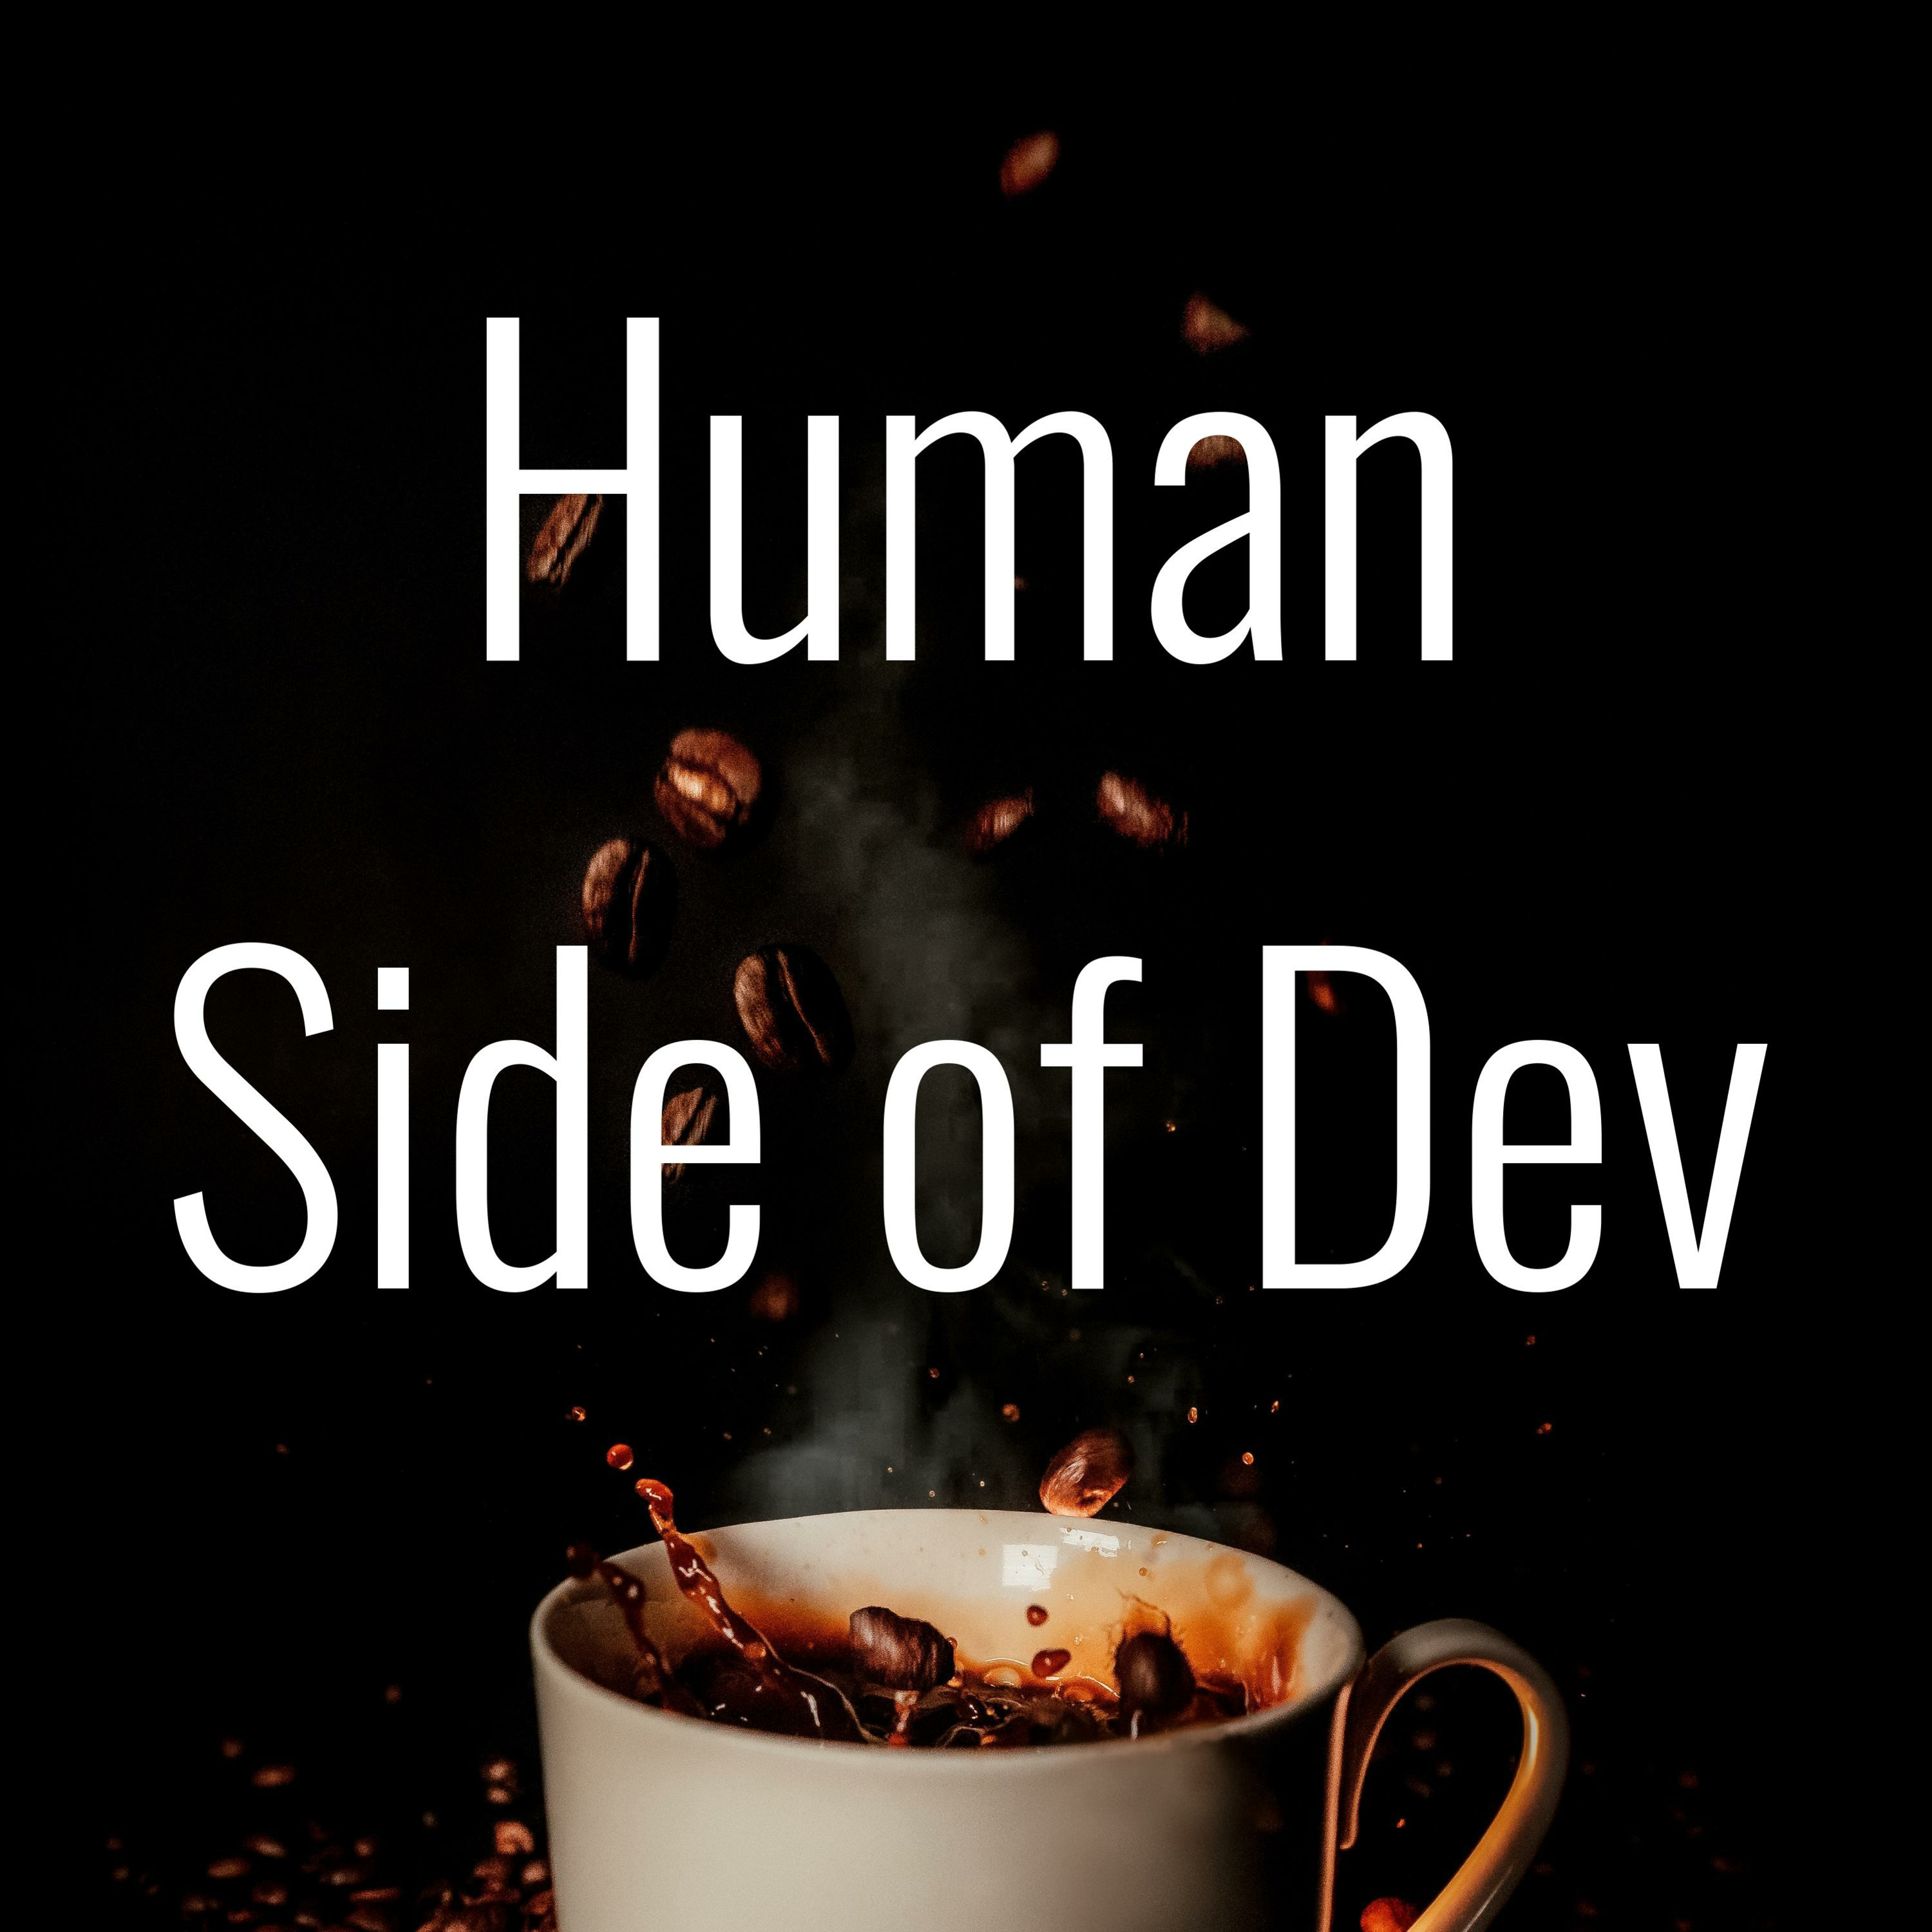 Human Side of Dev Welcome to the Human Side of Dev